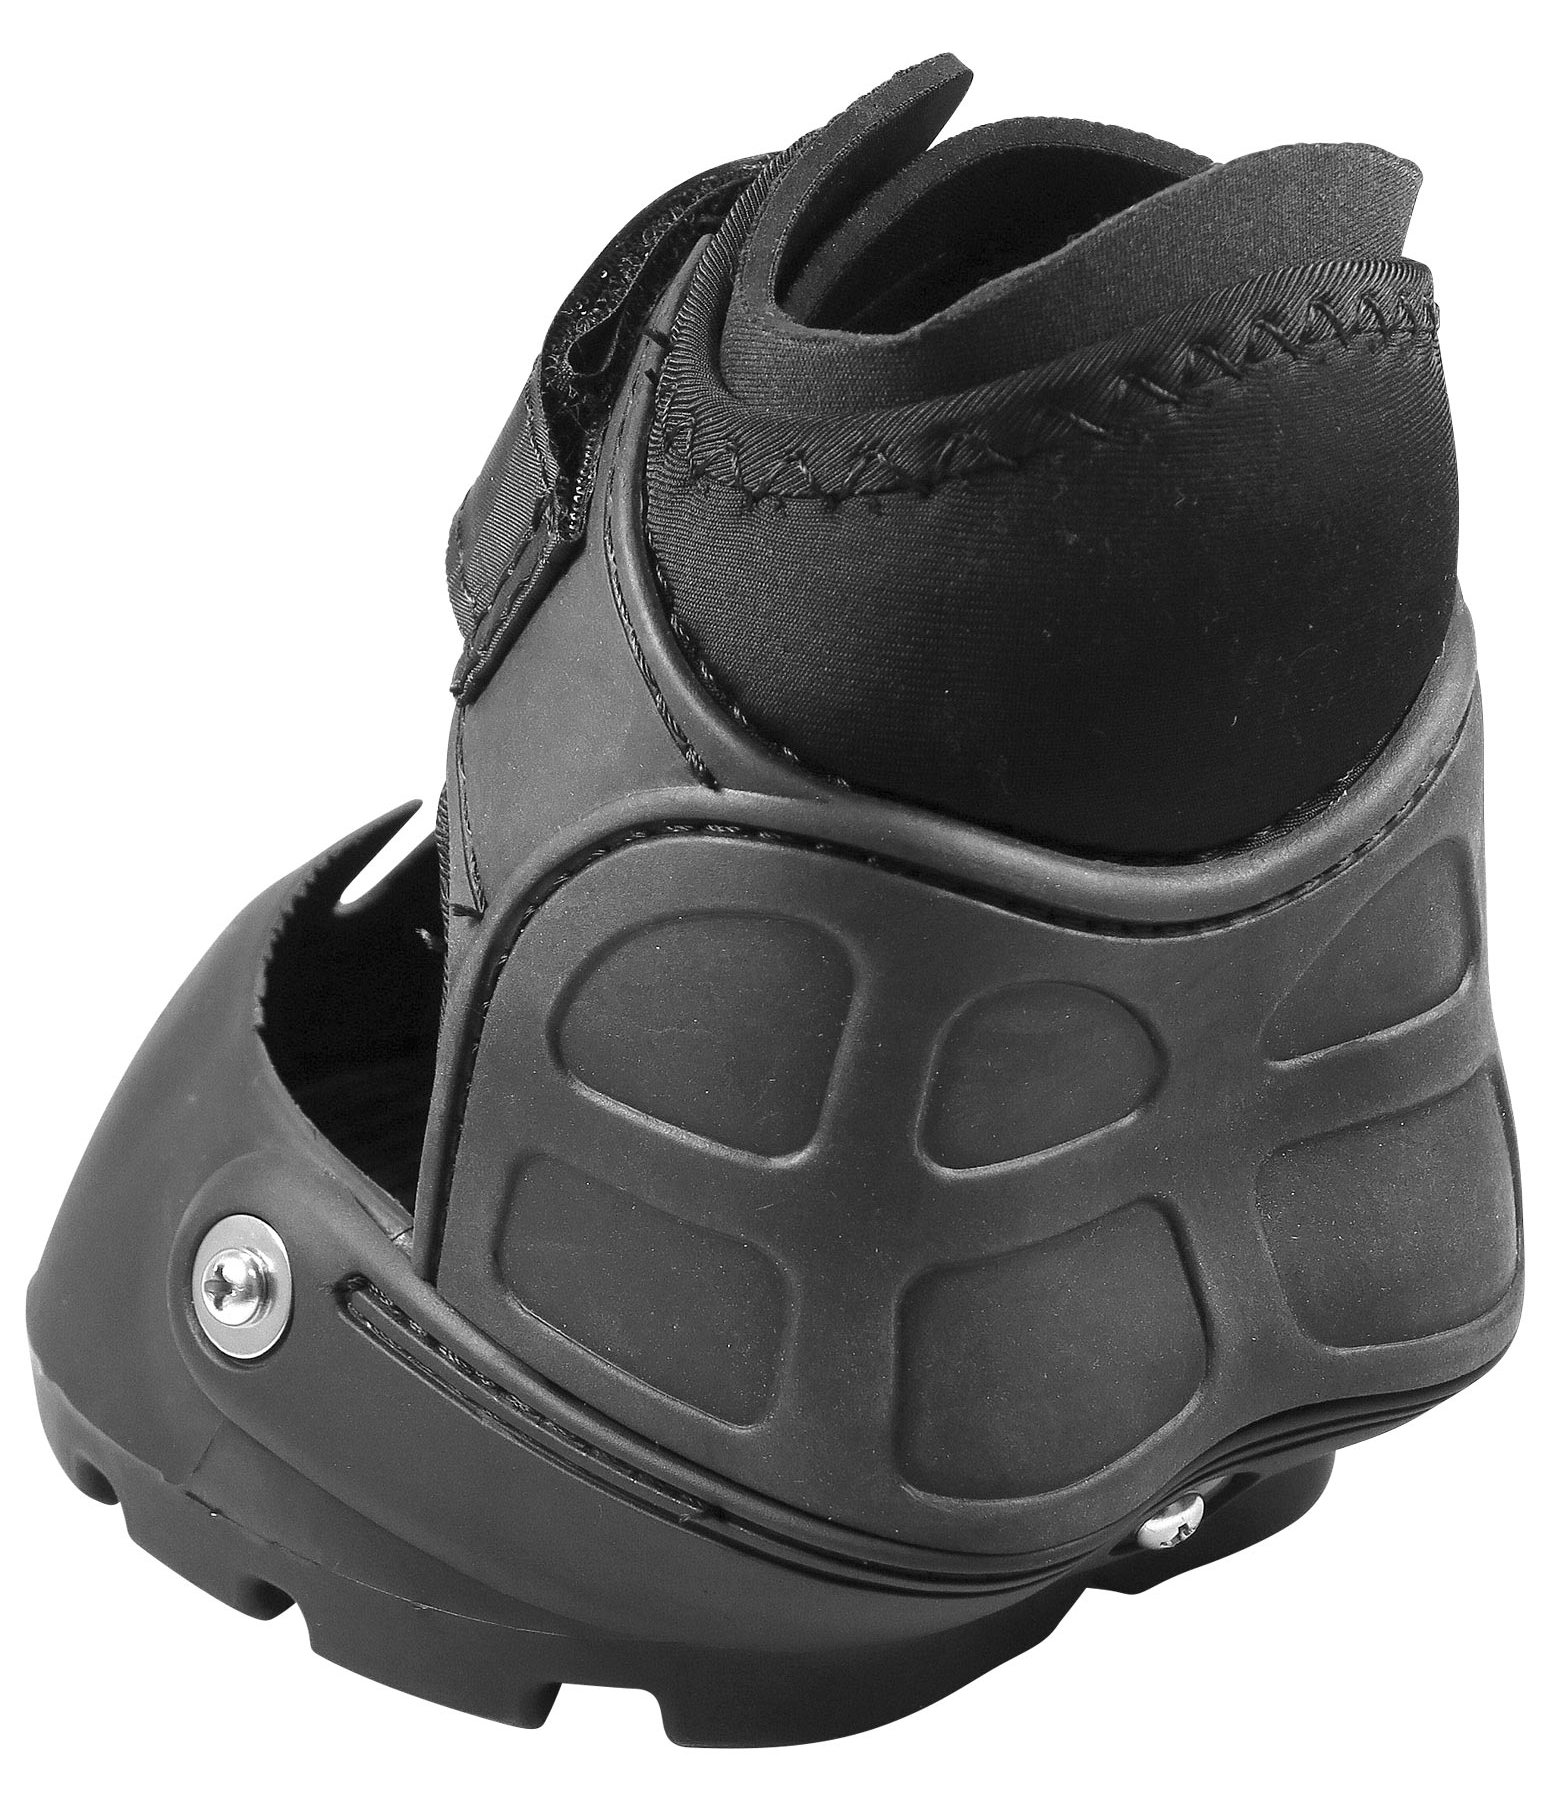 easyboot glove soft reviews